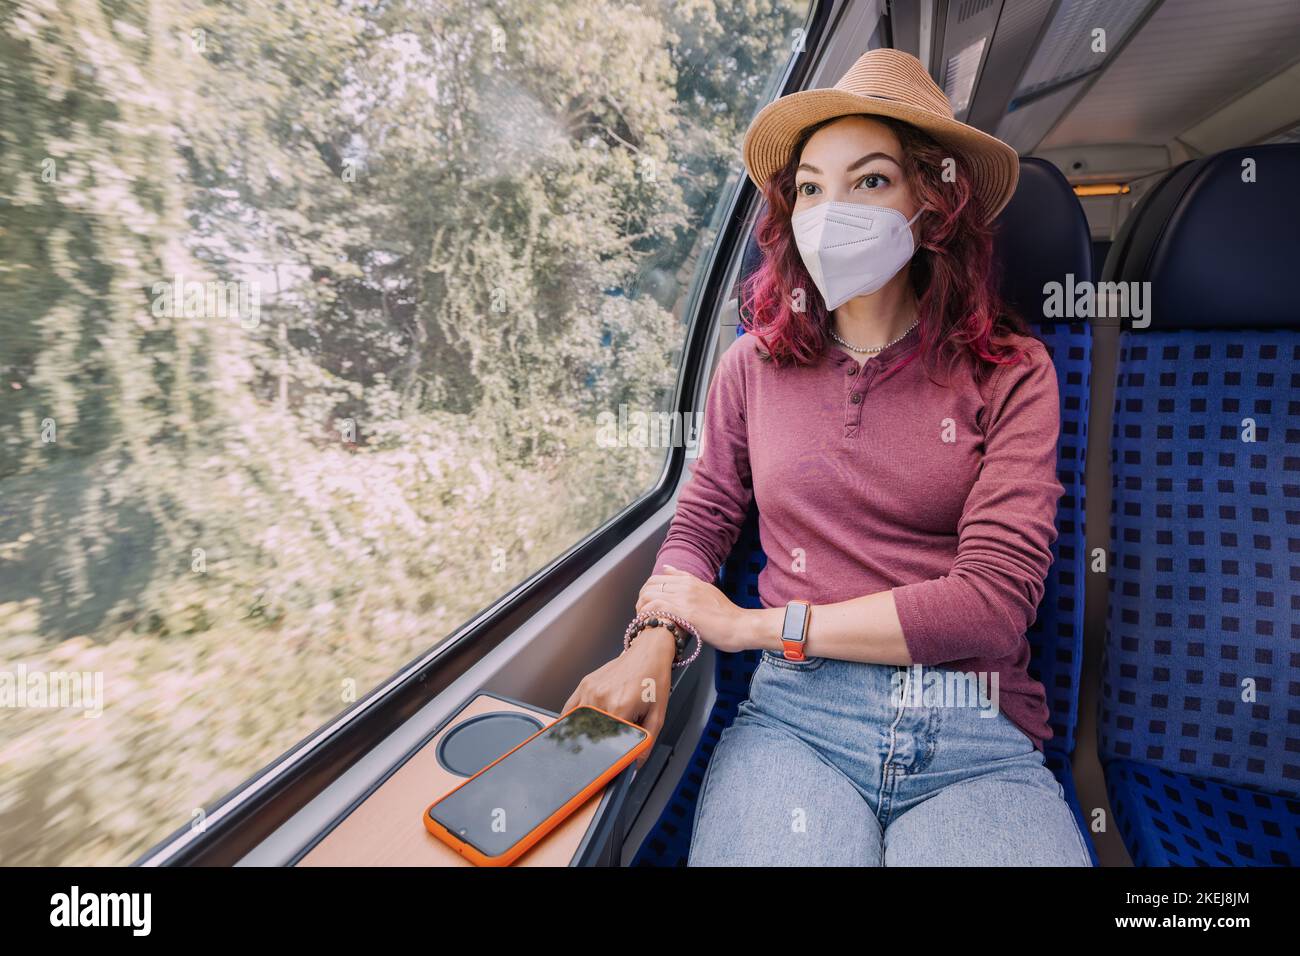 A girl in a protective medical mask rides a high-speed intercity train and looks out the window Stock Photo